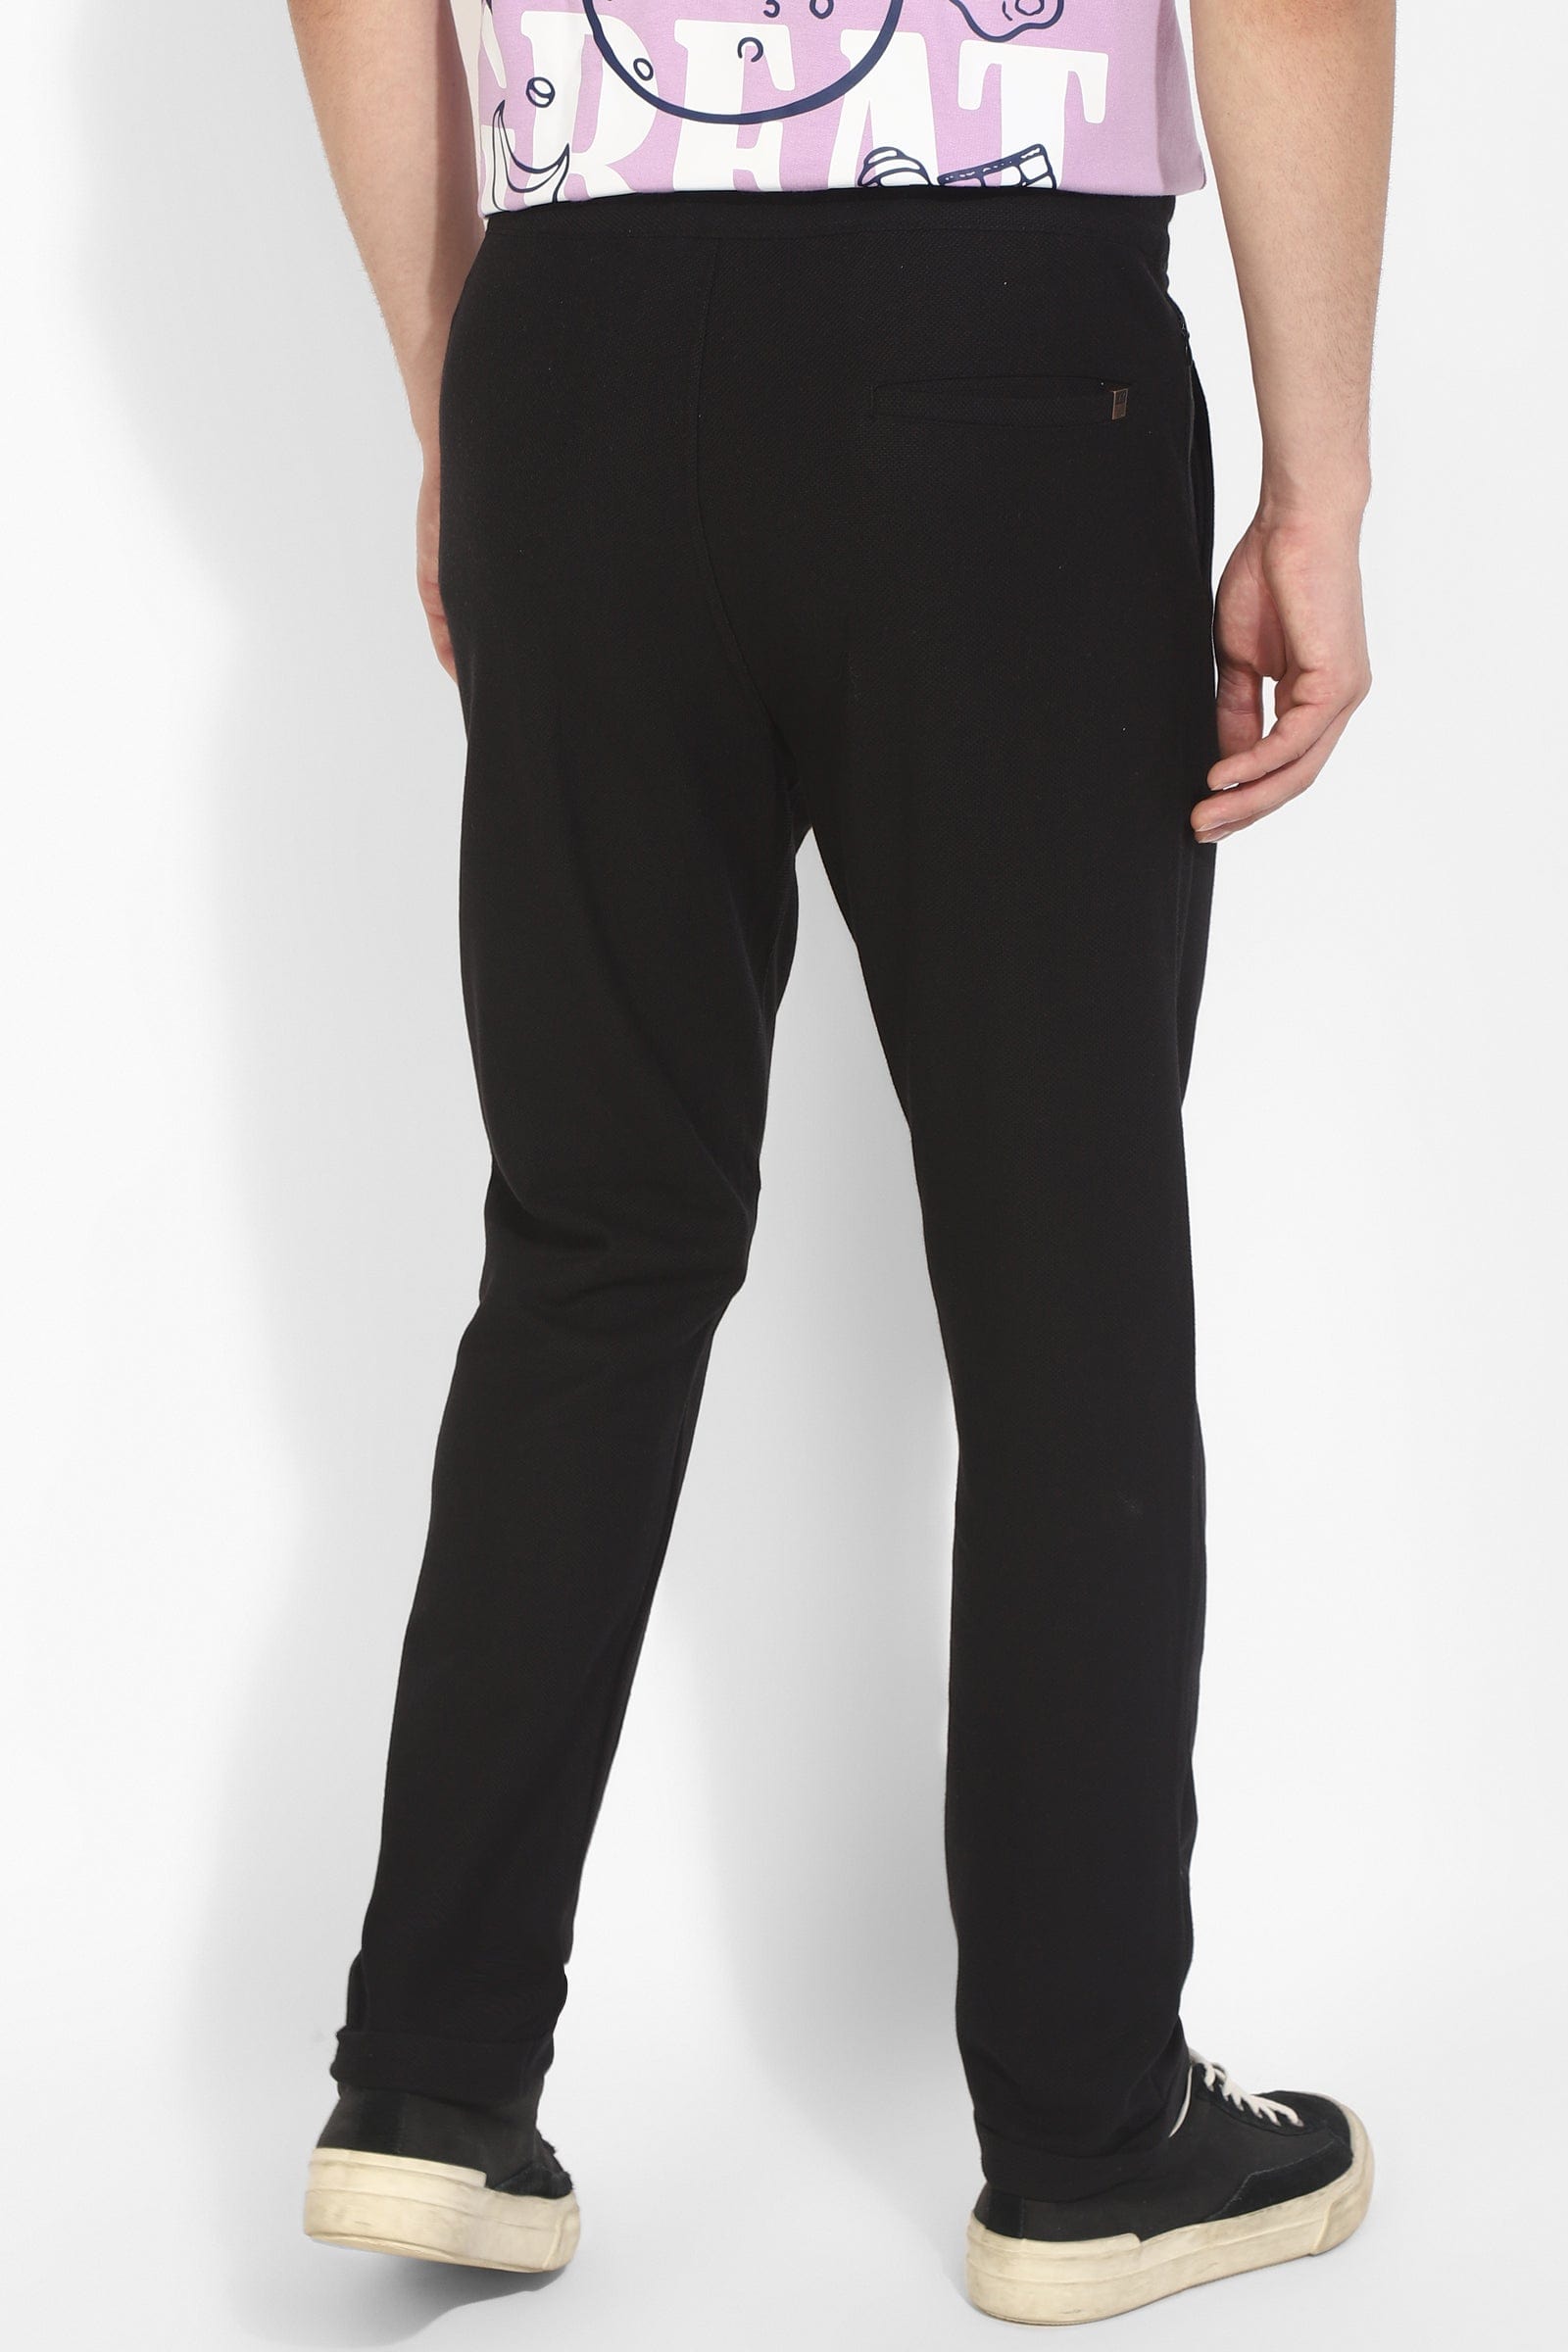 Black Knitted Trousers By Purple Mango